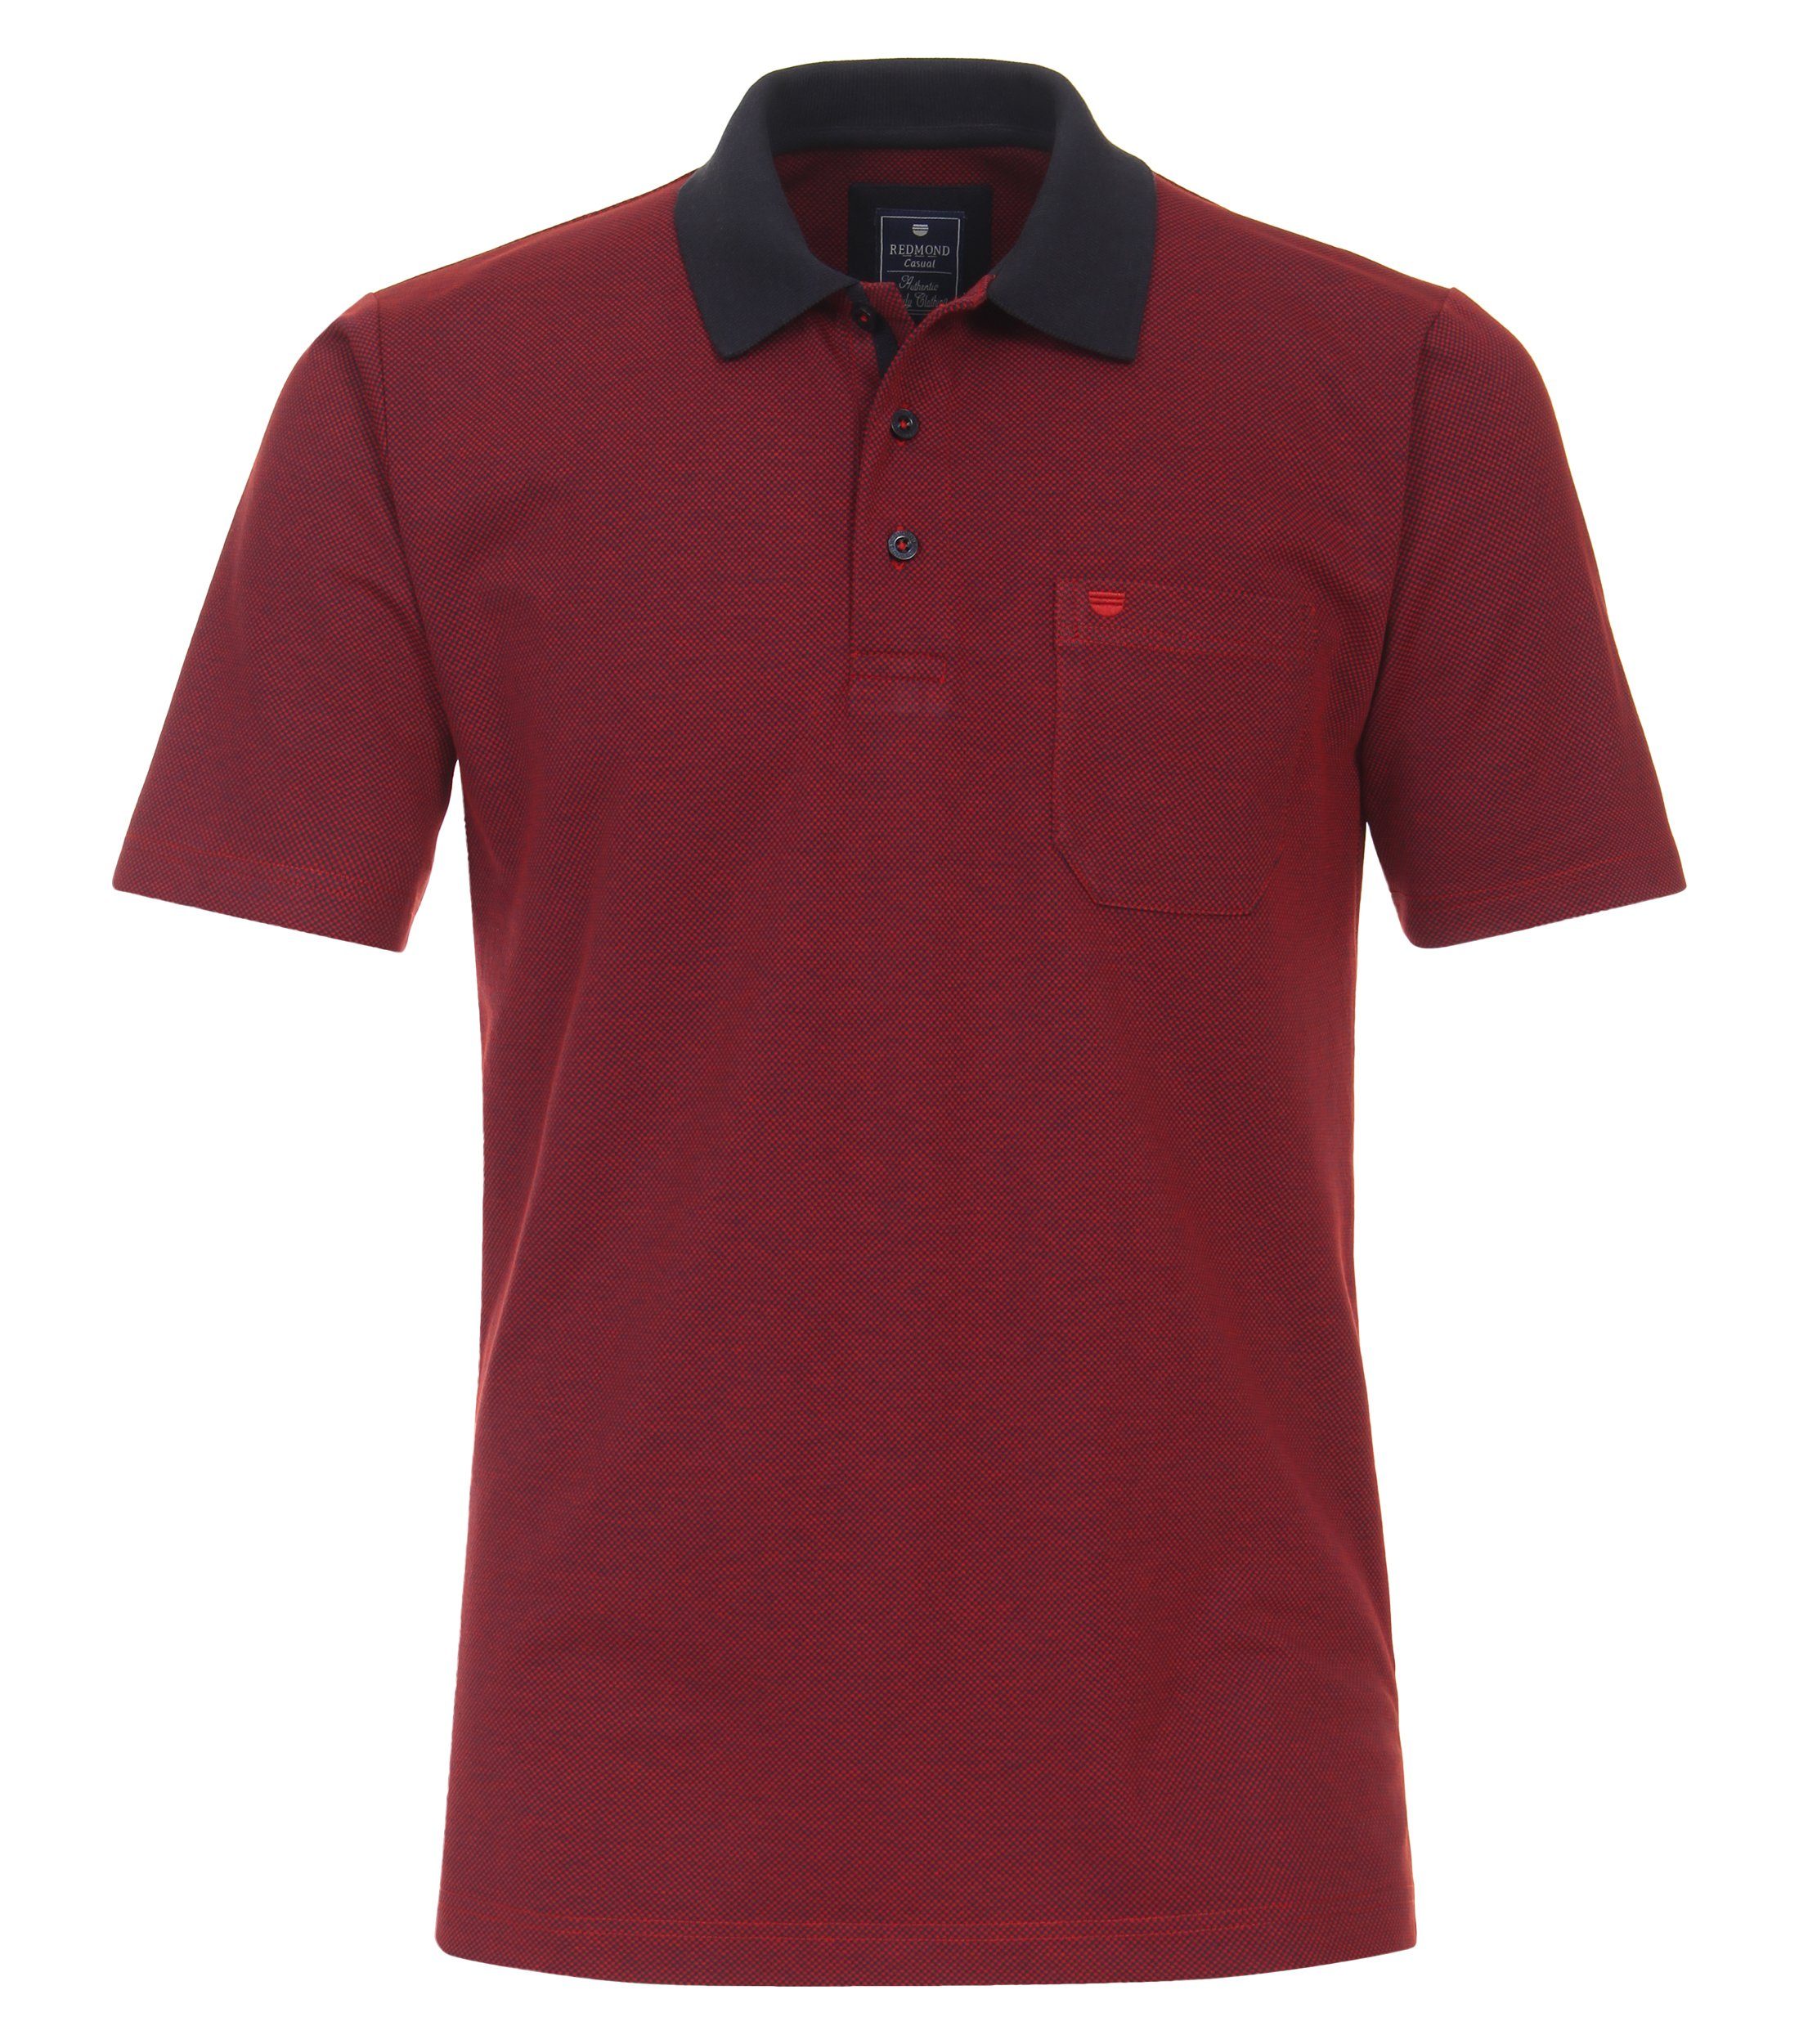 Muster Redmond rot Poloshirt andere 50